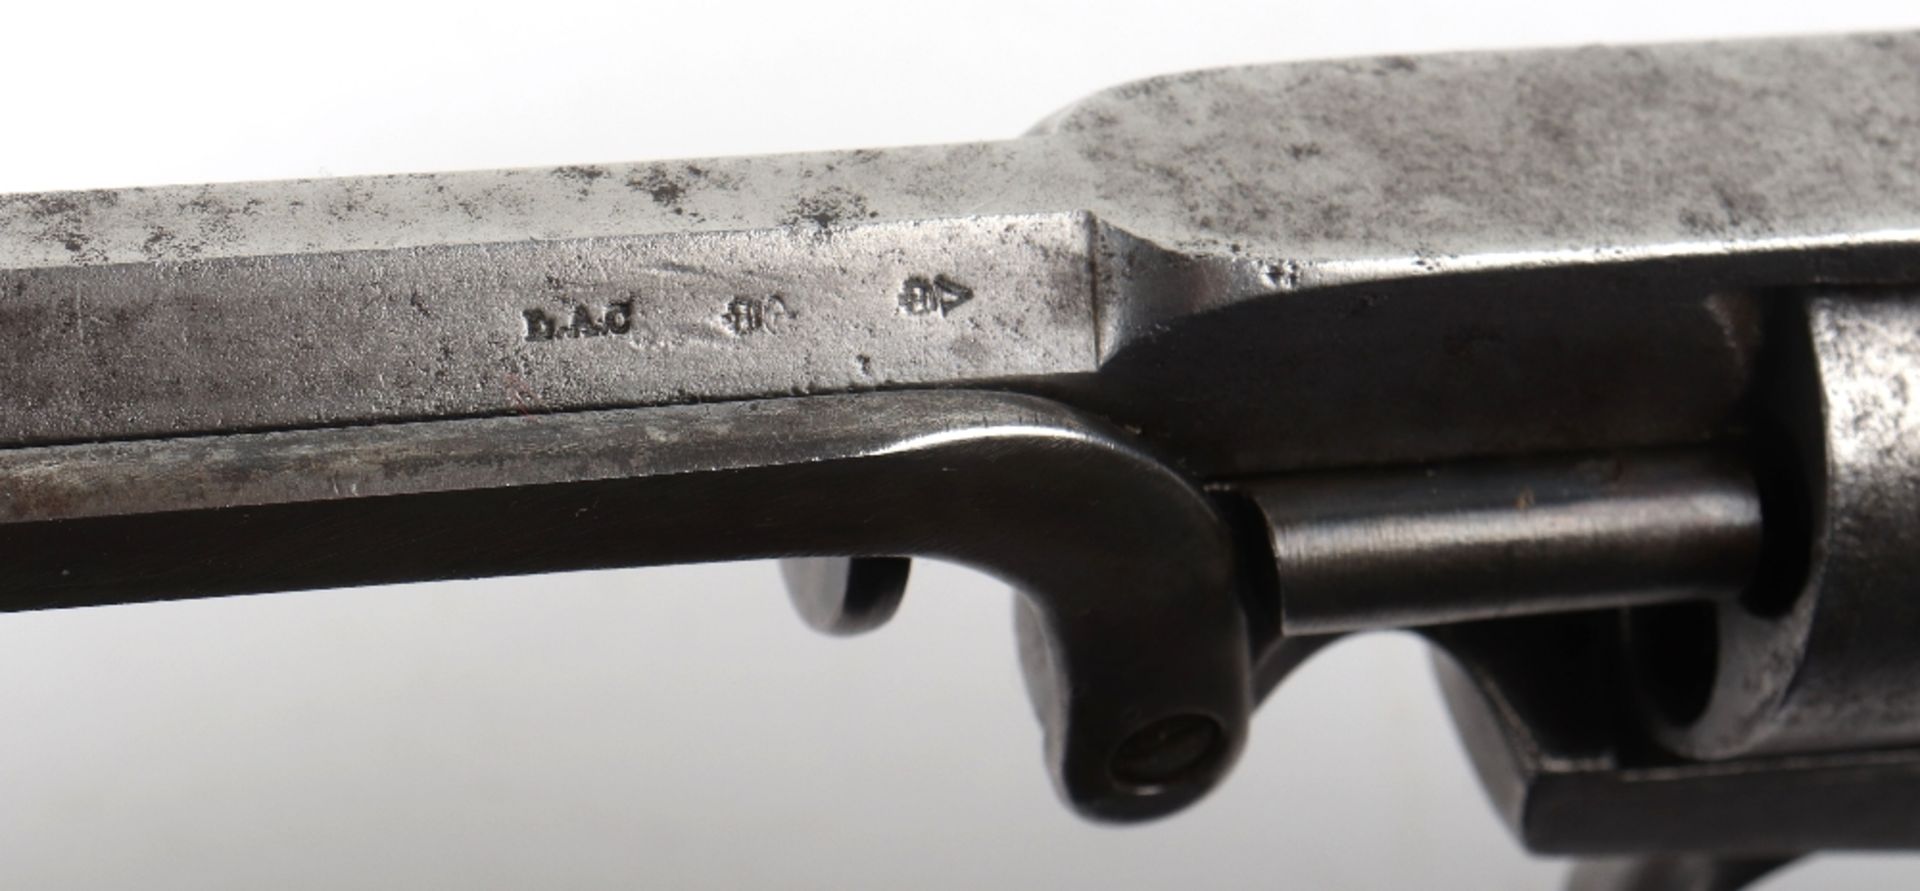 5 Shot 54-Bore Beaumont Adams Double Action Percussion Revolver with Connections to the Confederate - Image 8 of 8